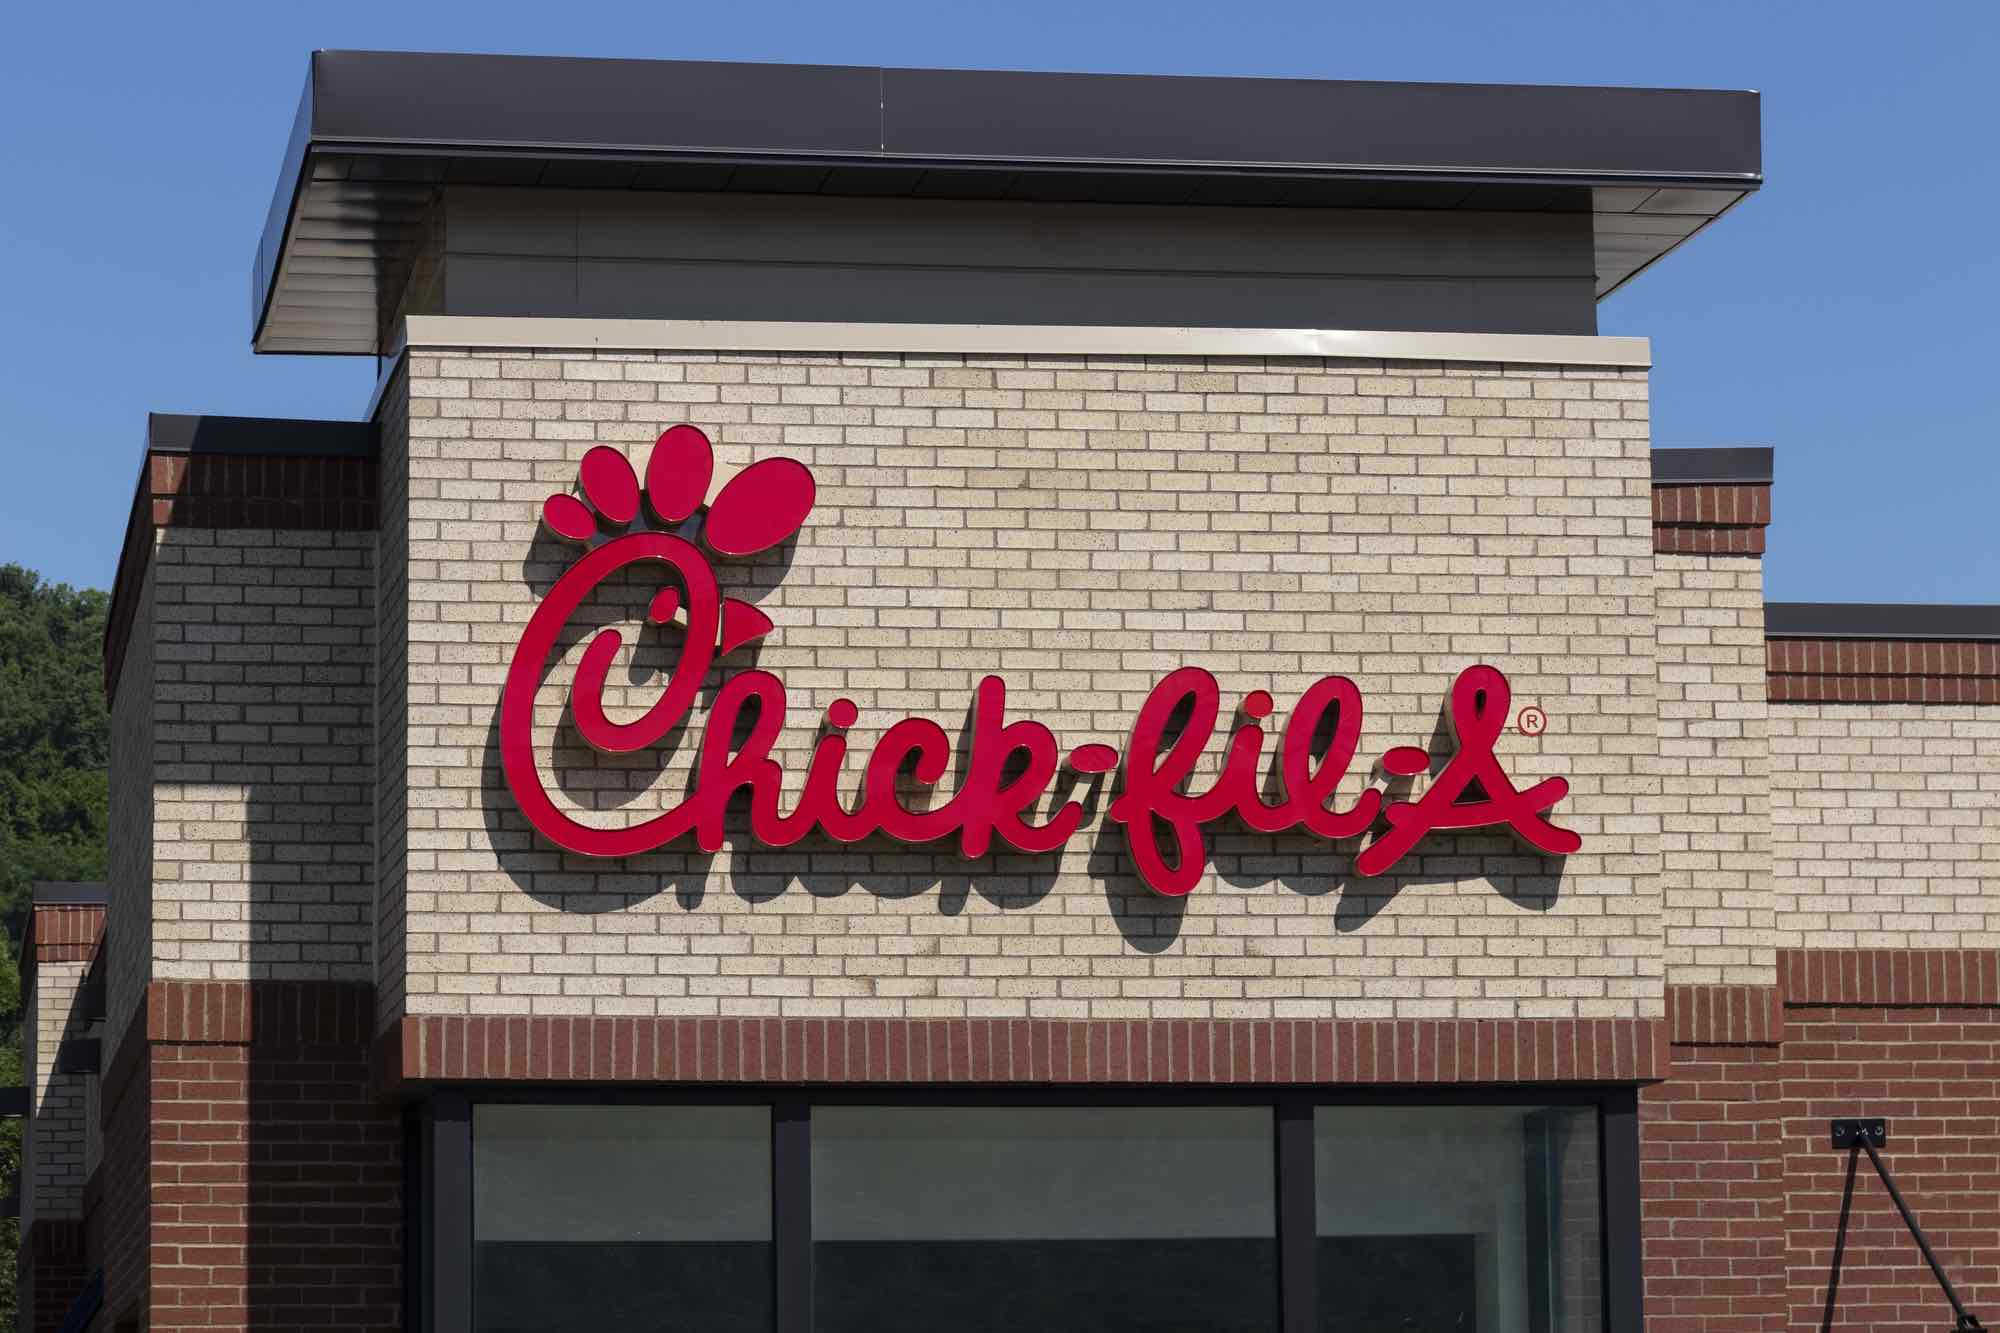 ChickfilA in Ocala temporarily closing for remodel